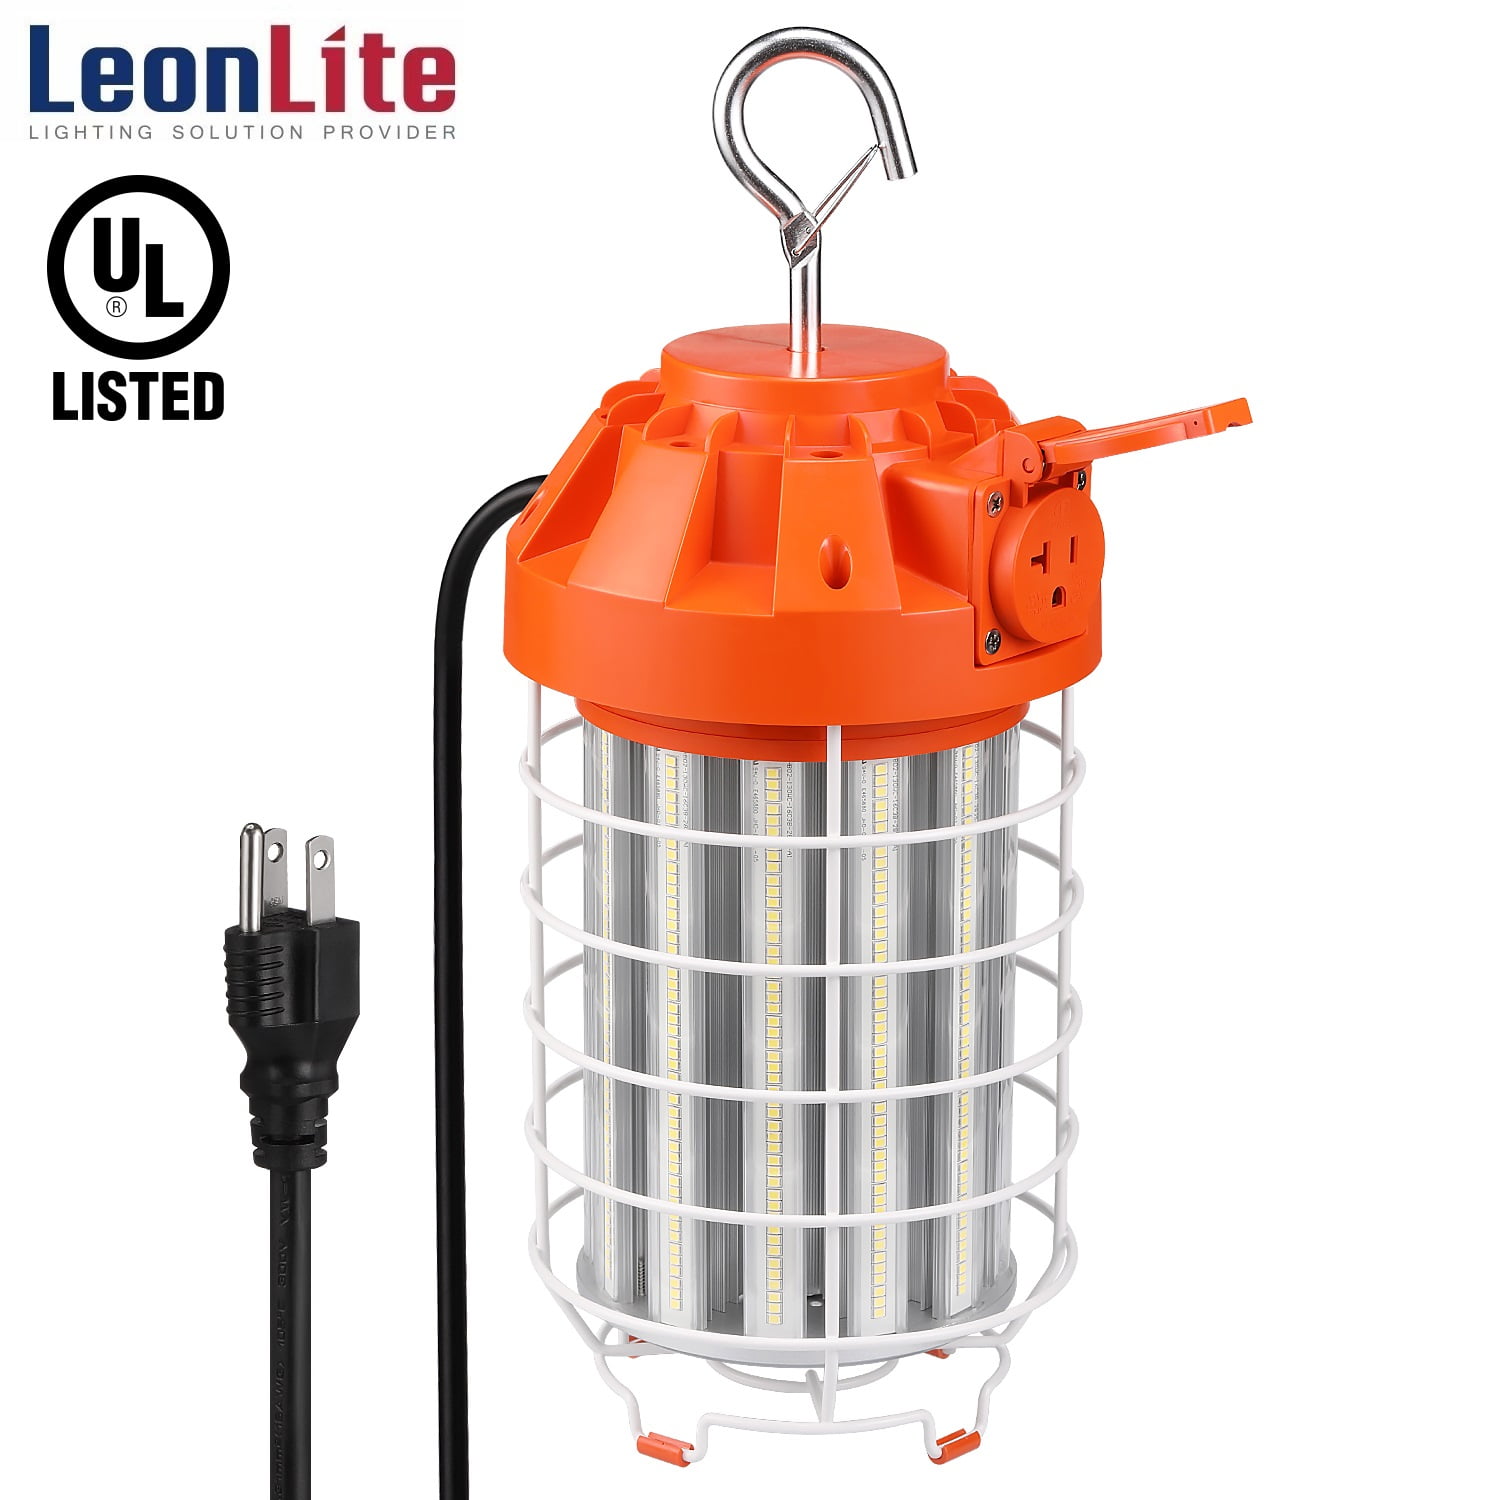 LEONLITE 130W High Bay LED Temporary Work Light Fixture for Workshop,  Building Site, Construction Site, 650W Eqv. 17,600 Lumens, UL Listed, 5000K  Daylight